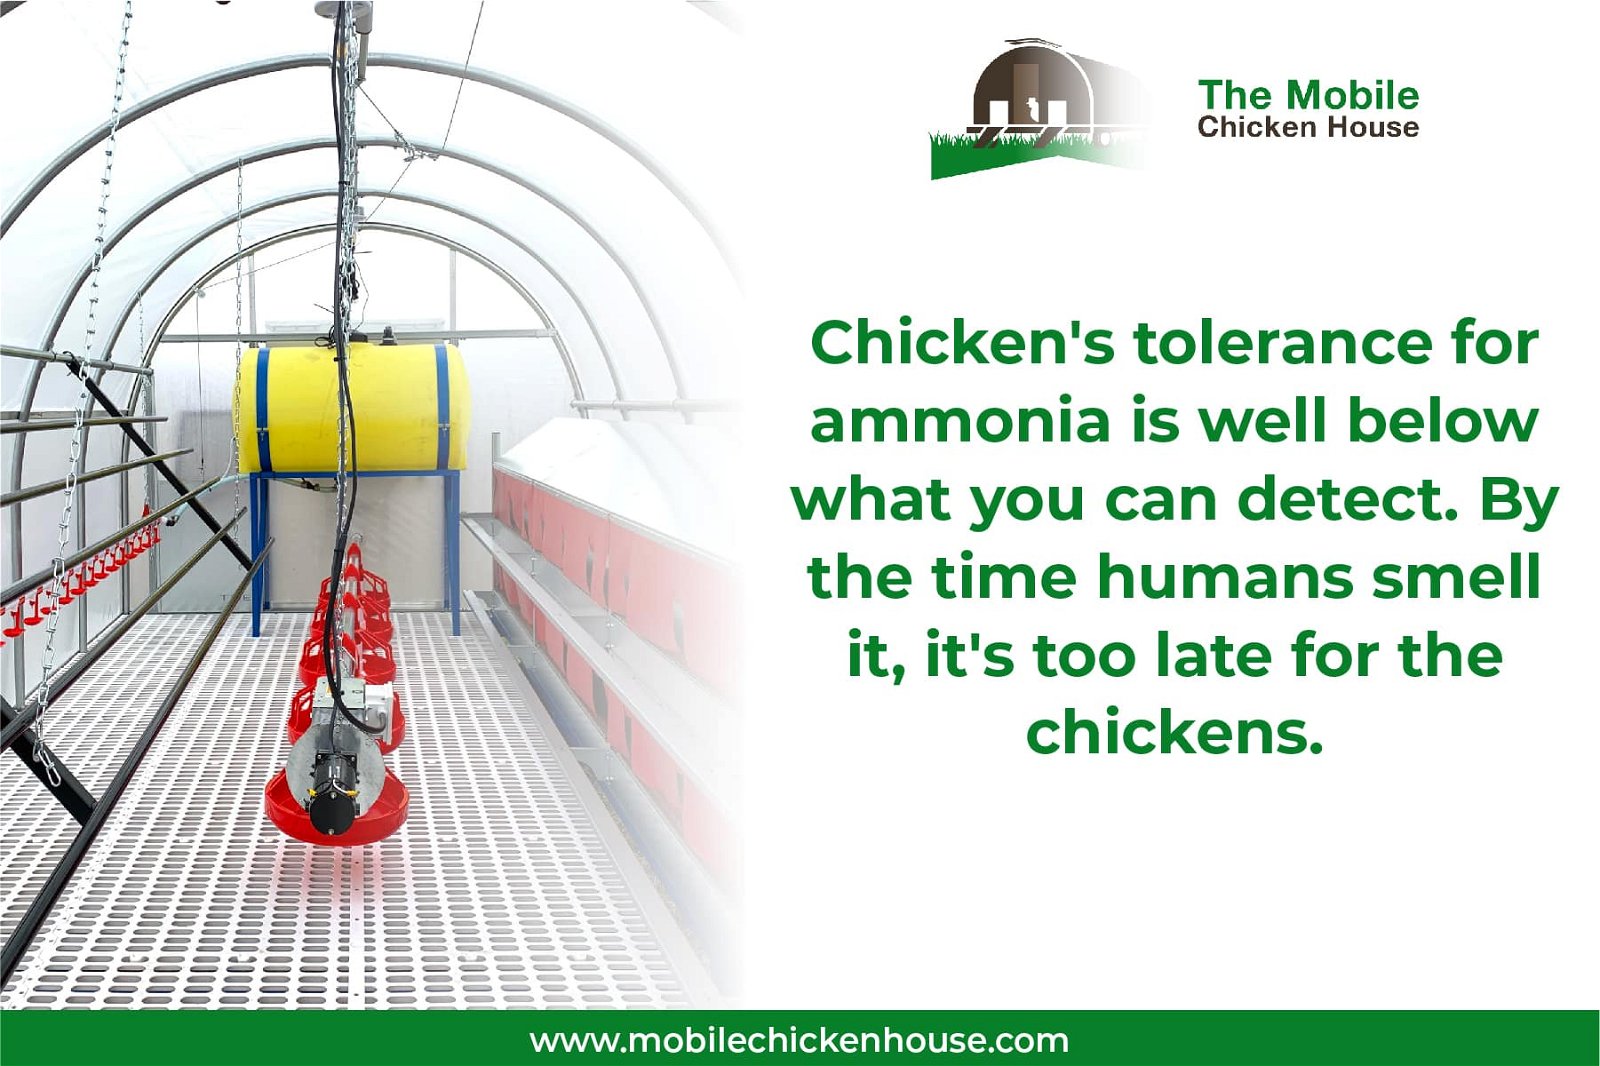 chickens have a low tolerance for ammonia